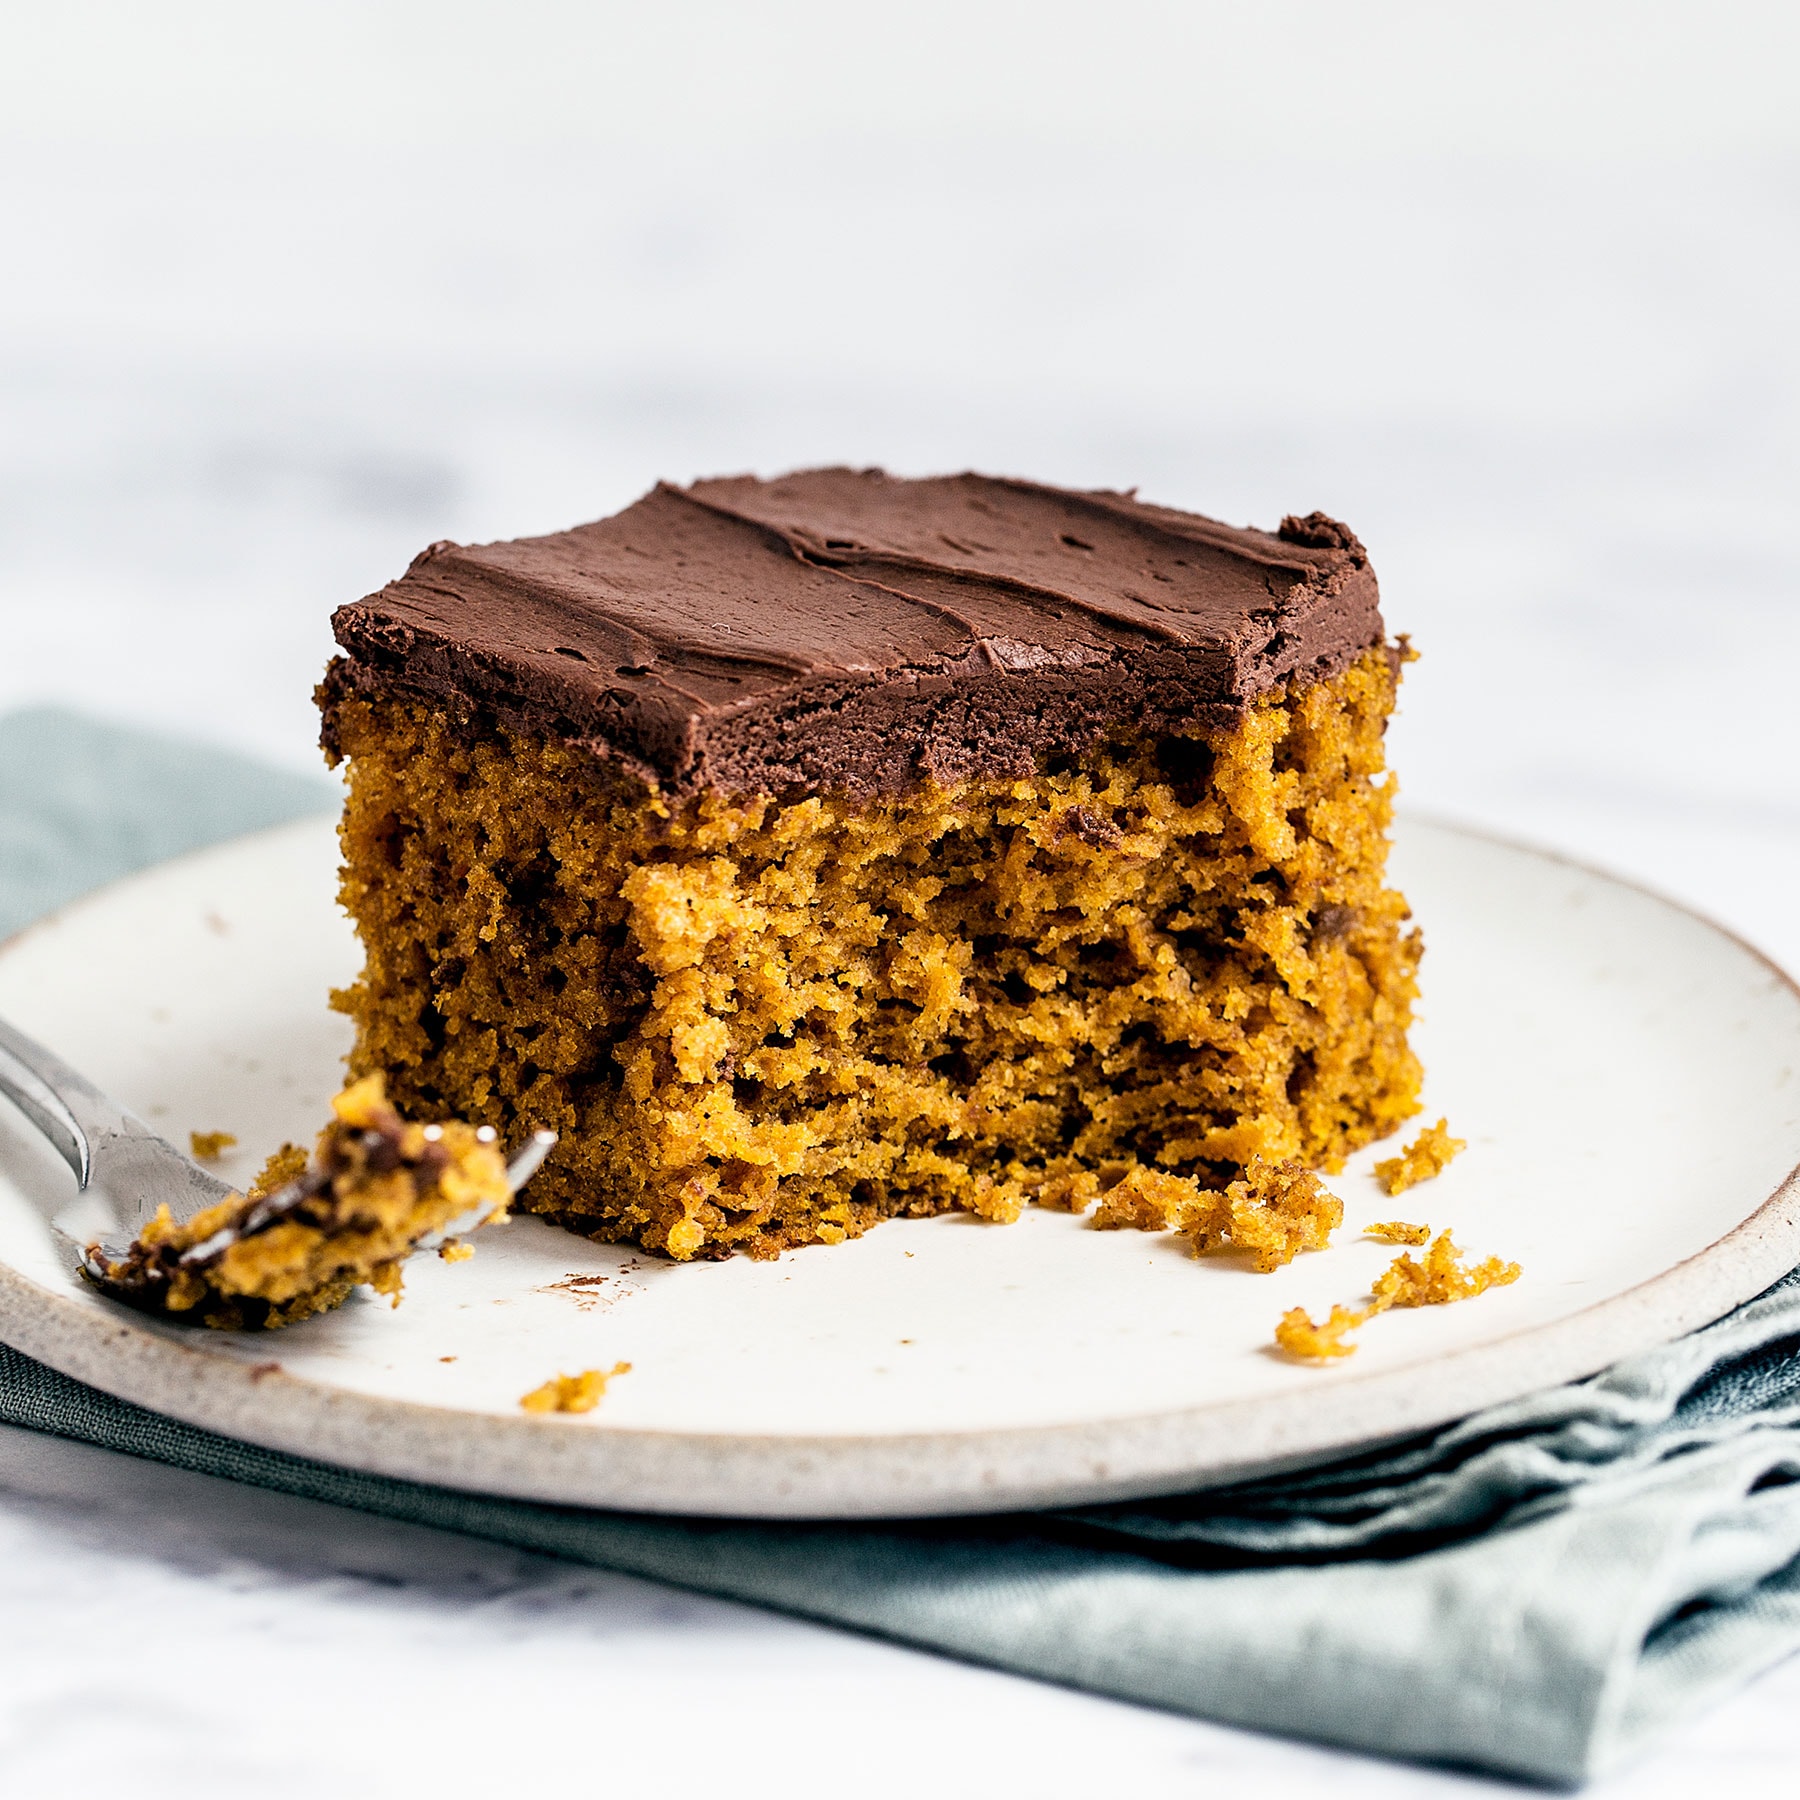 Easy Pumpkin Cake with Whipped Ganache features a super simple spiced pumpkin sour cream cake layer topped with creamy and light whipped chocolate ganache for a quick fall treat perfect for any party or craving!